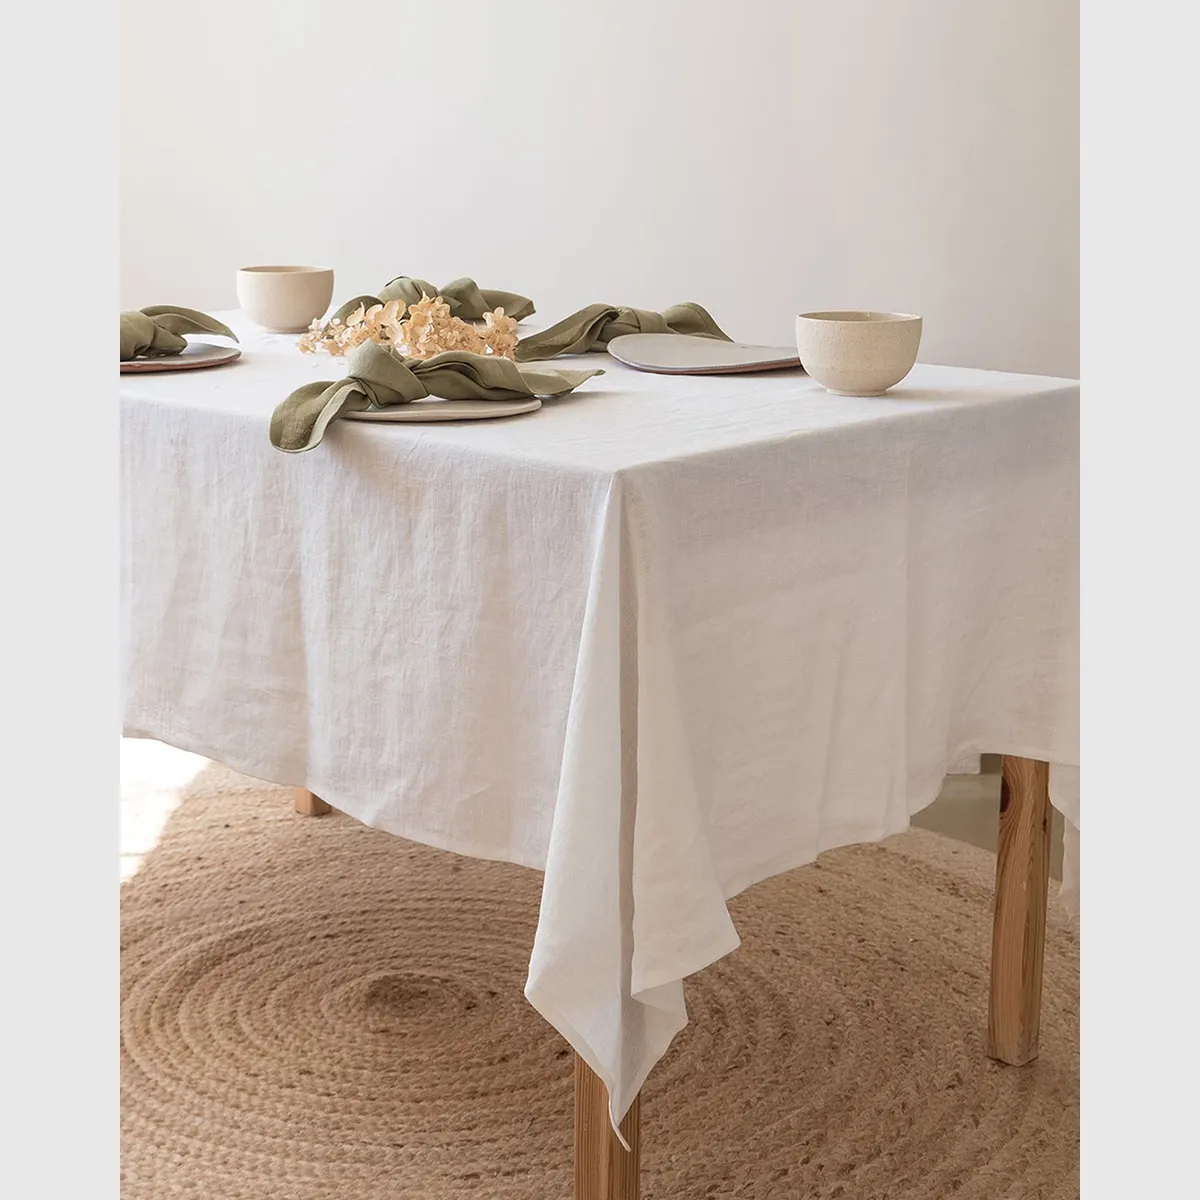 Restaurant Washed Woven Table Cloth Customer Size Multi Color Rectangular Table Cloths 100% Pure Linen christmas table linen